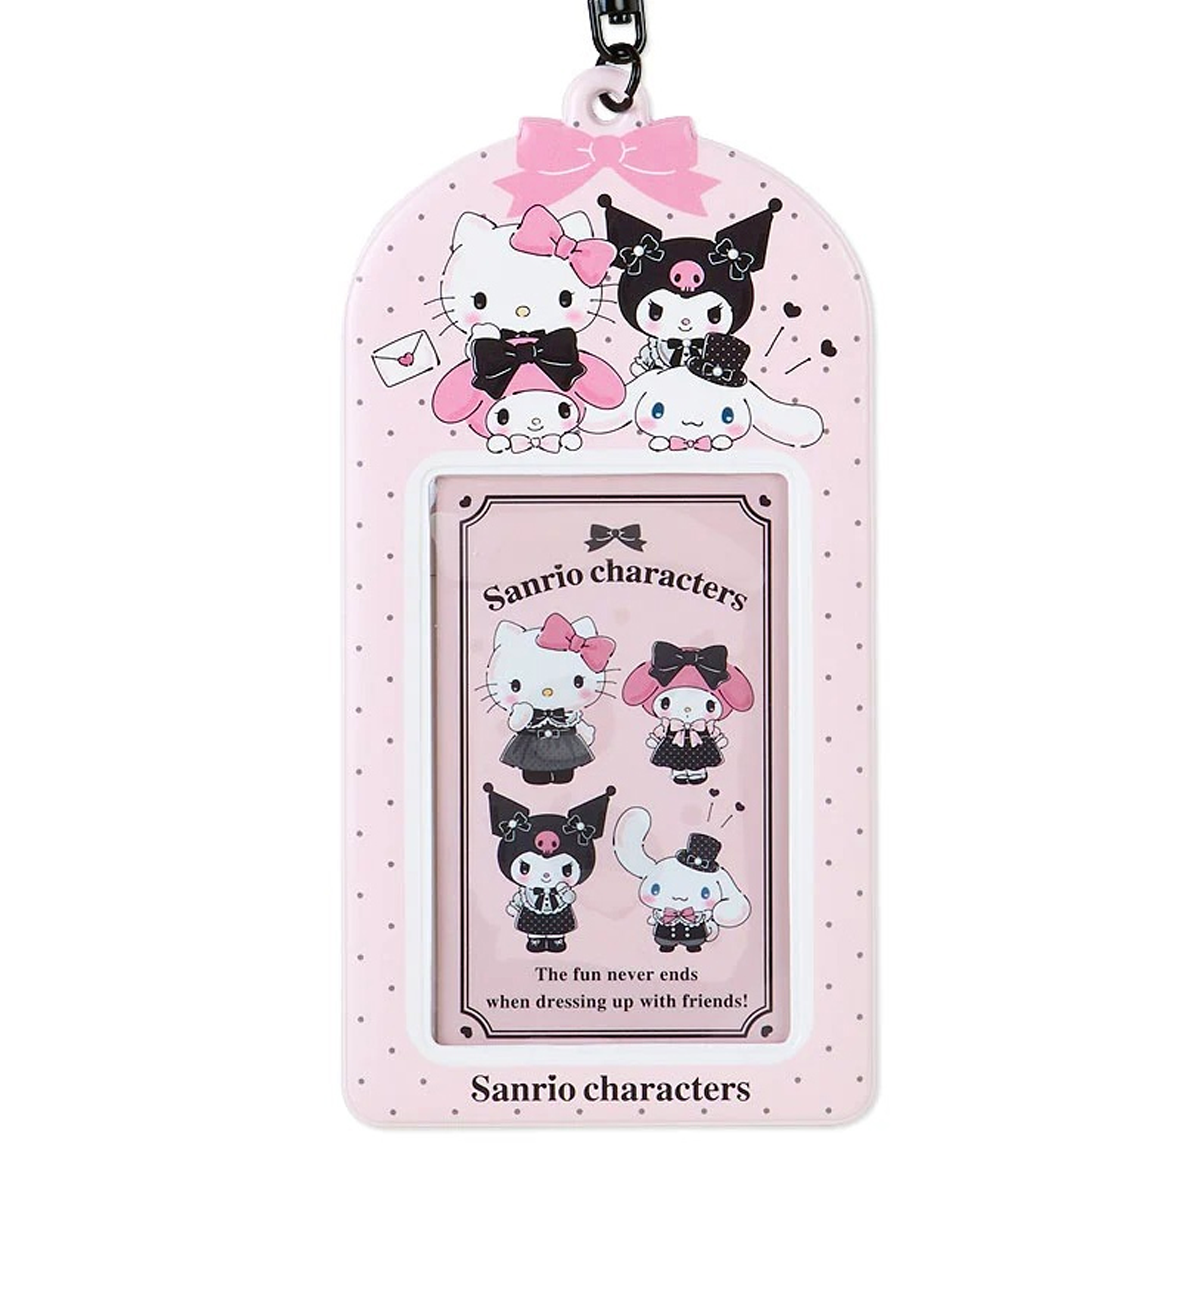 Sanrio Exciting Sweet Party Series Card Holder & Sticker Set